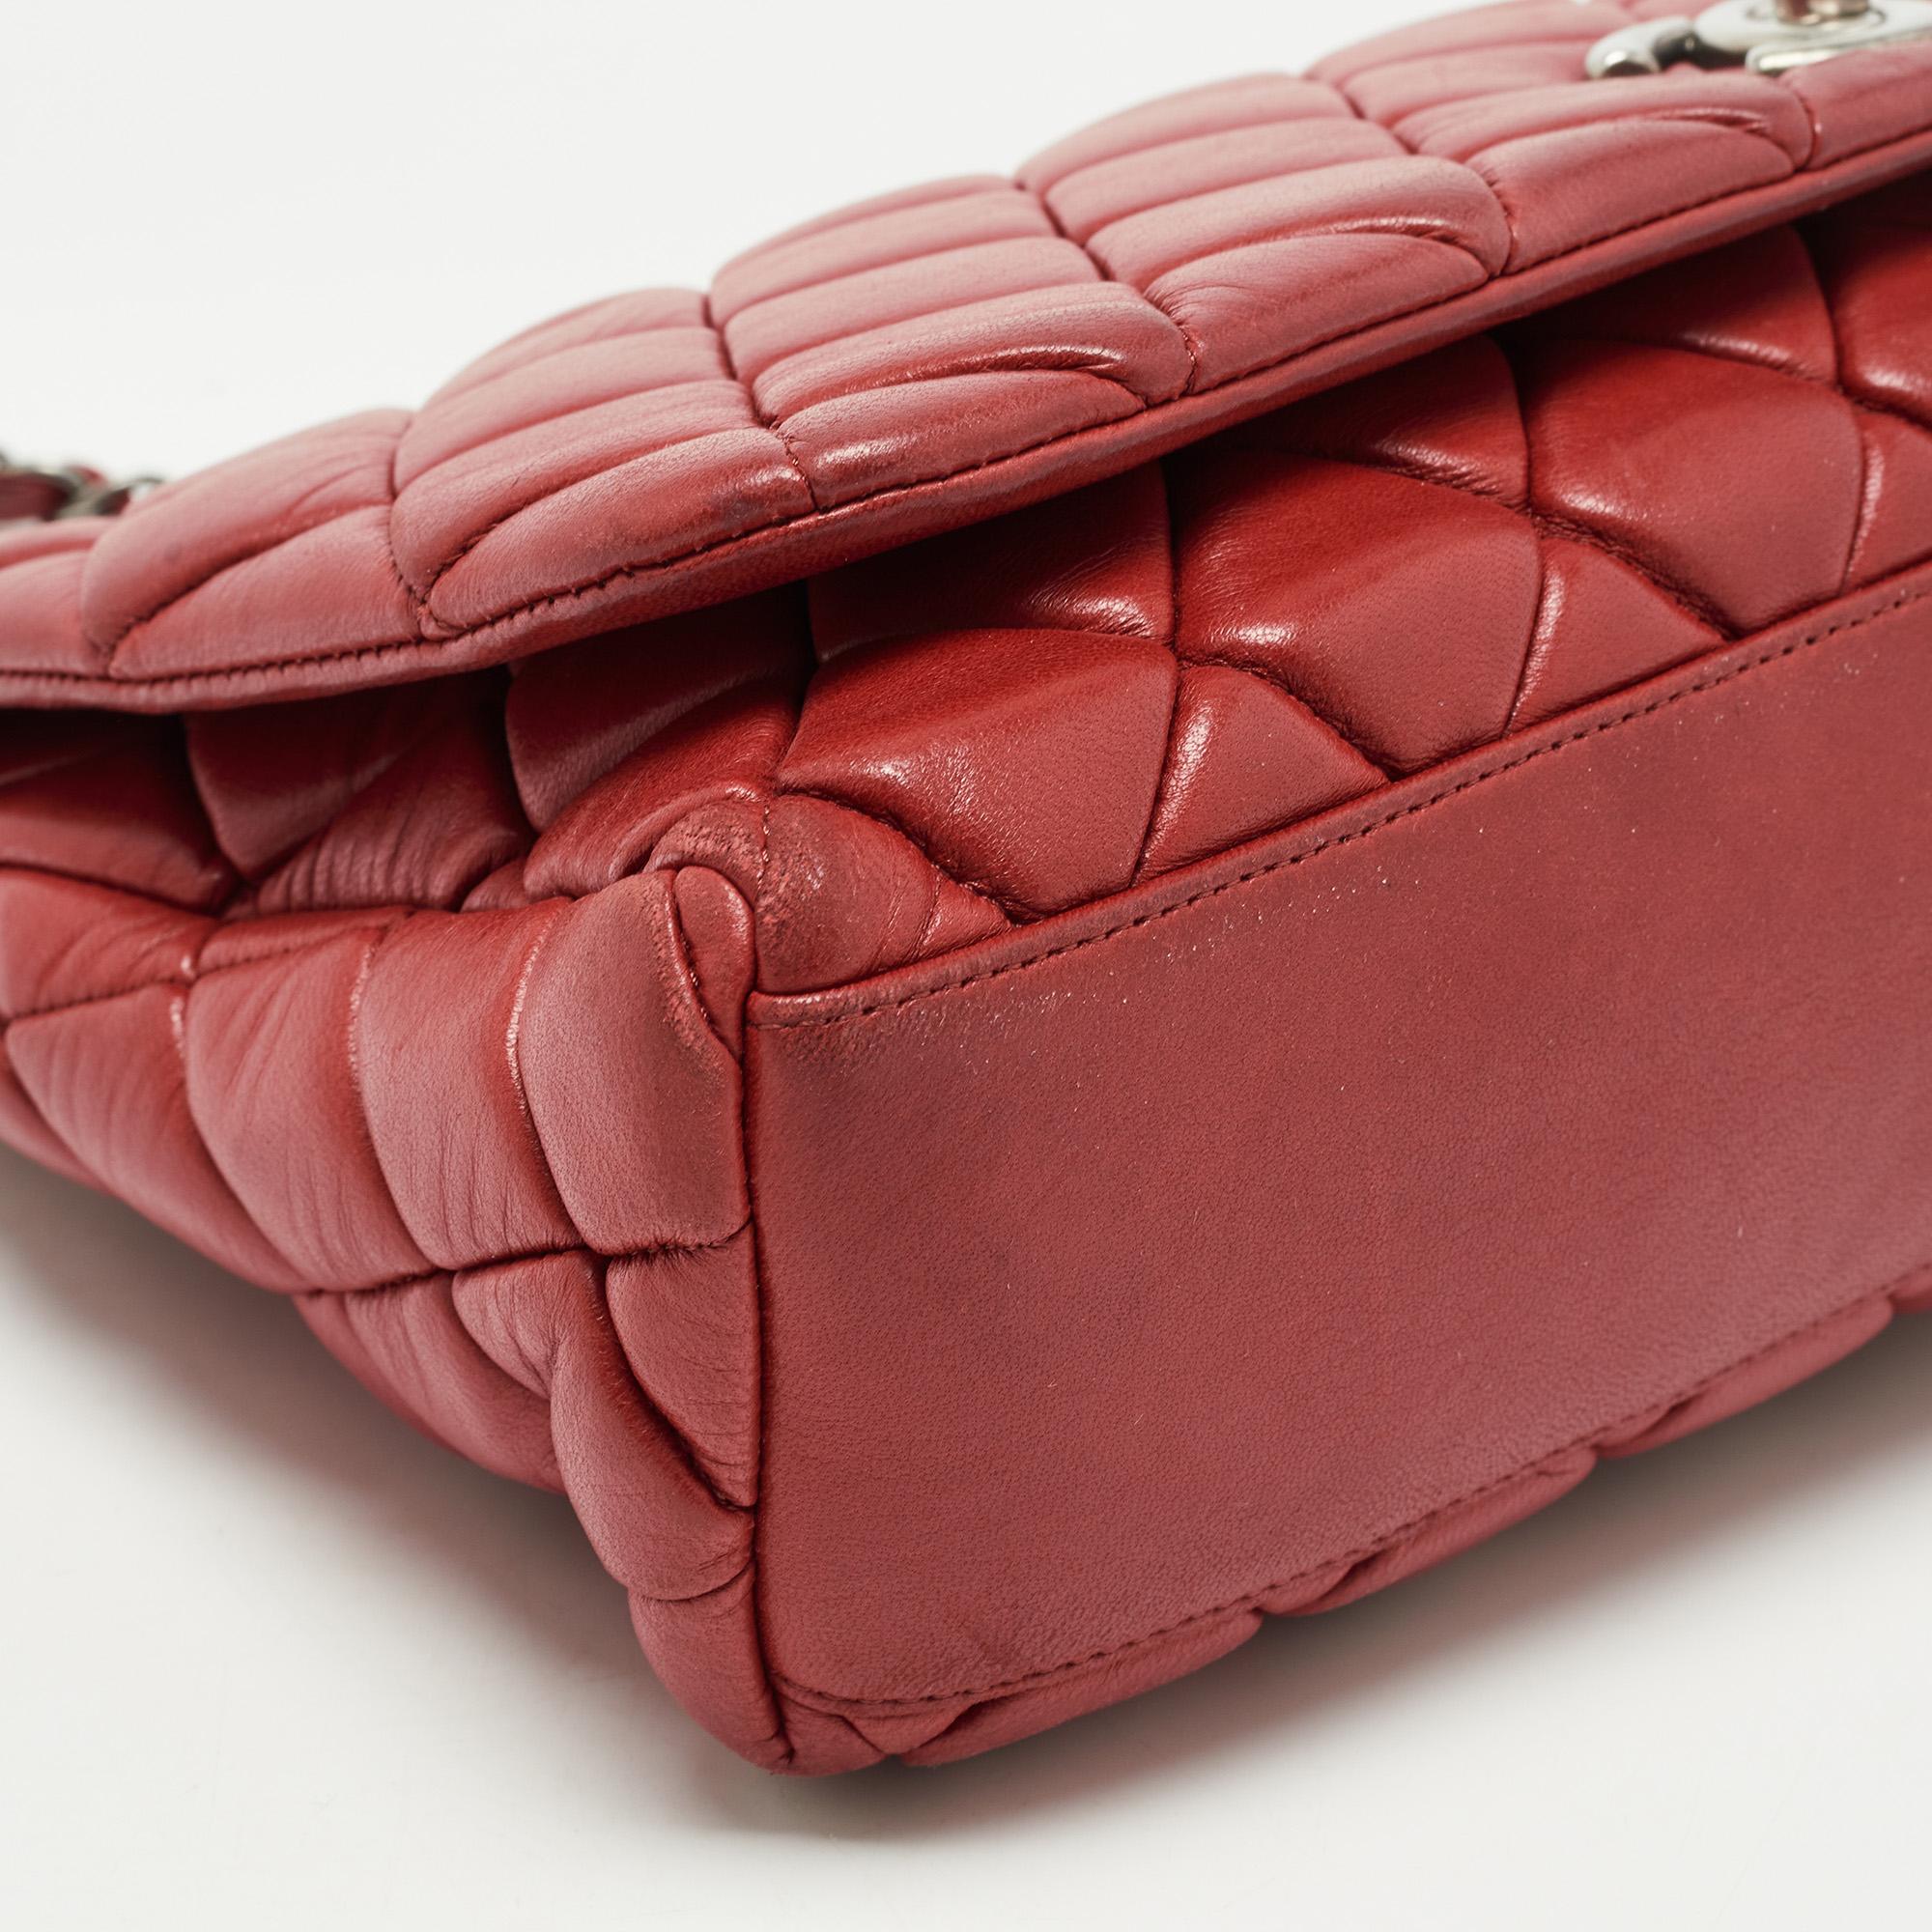 Chanel Red Bubble Quilted Leather Flap Shoulder Bag 6